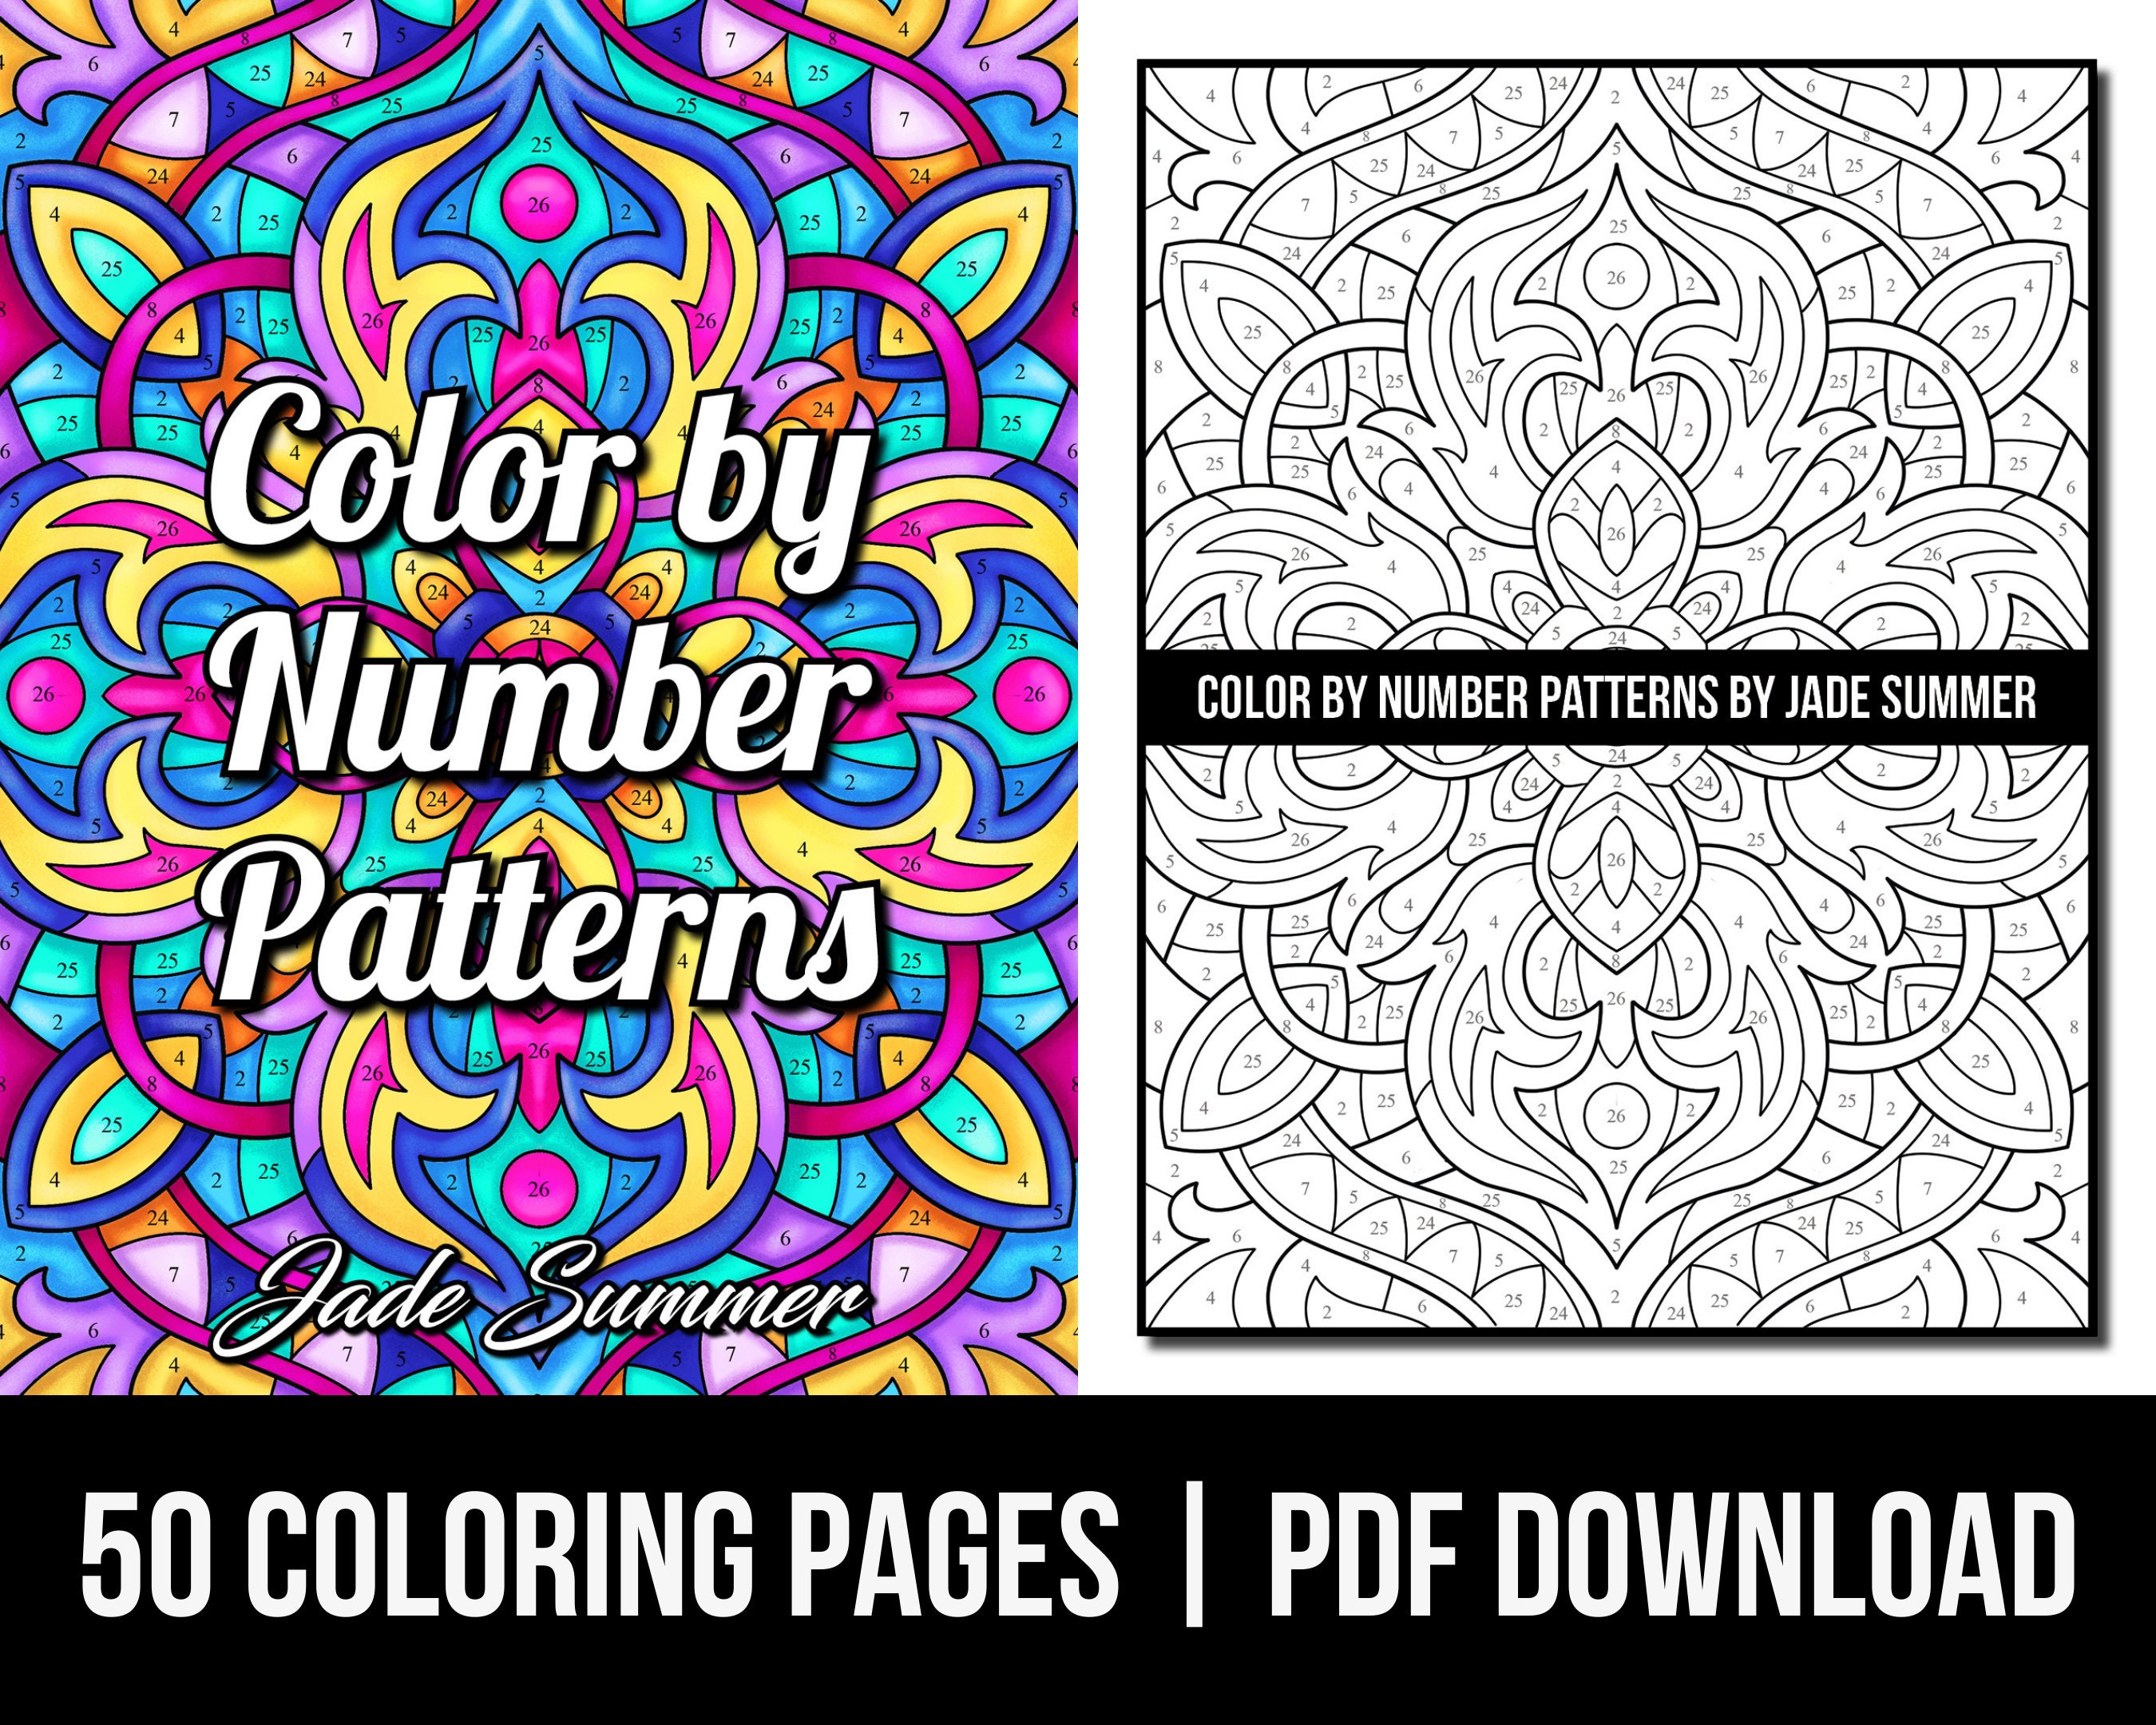 Adult Coloring Book With Color By Number or NOT - Mandalas Vol. 4